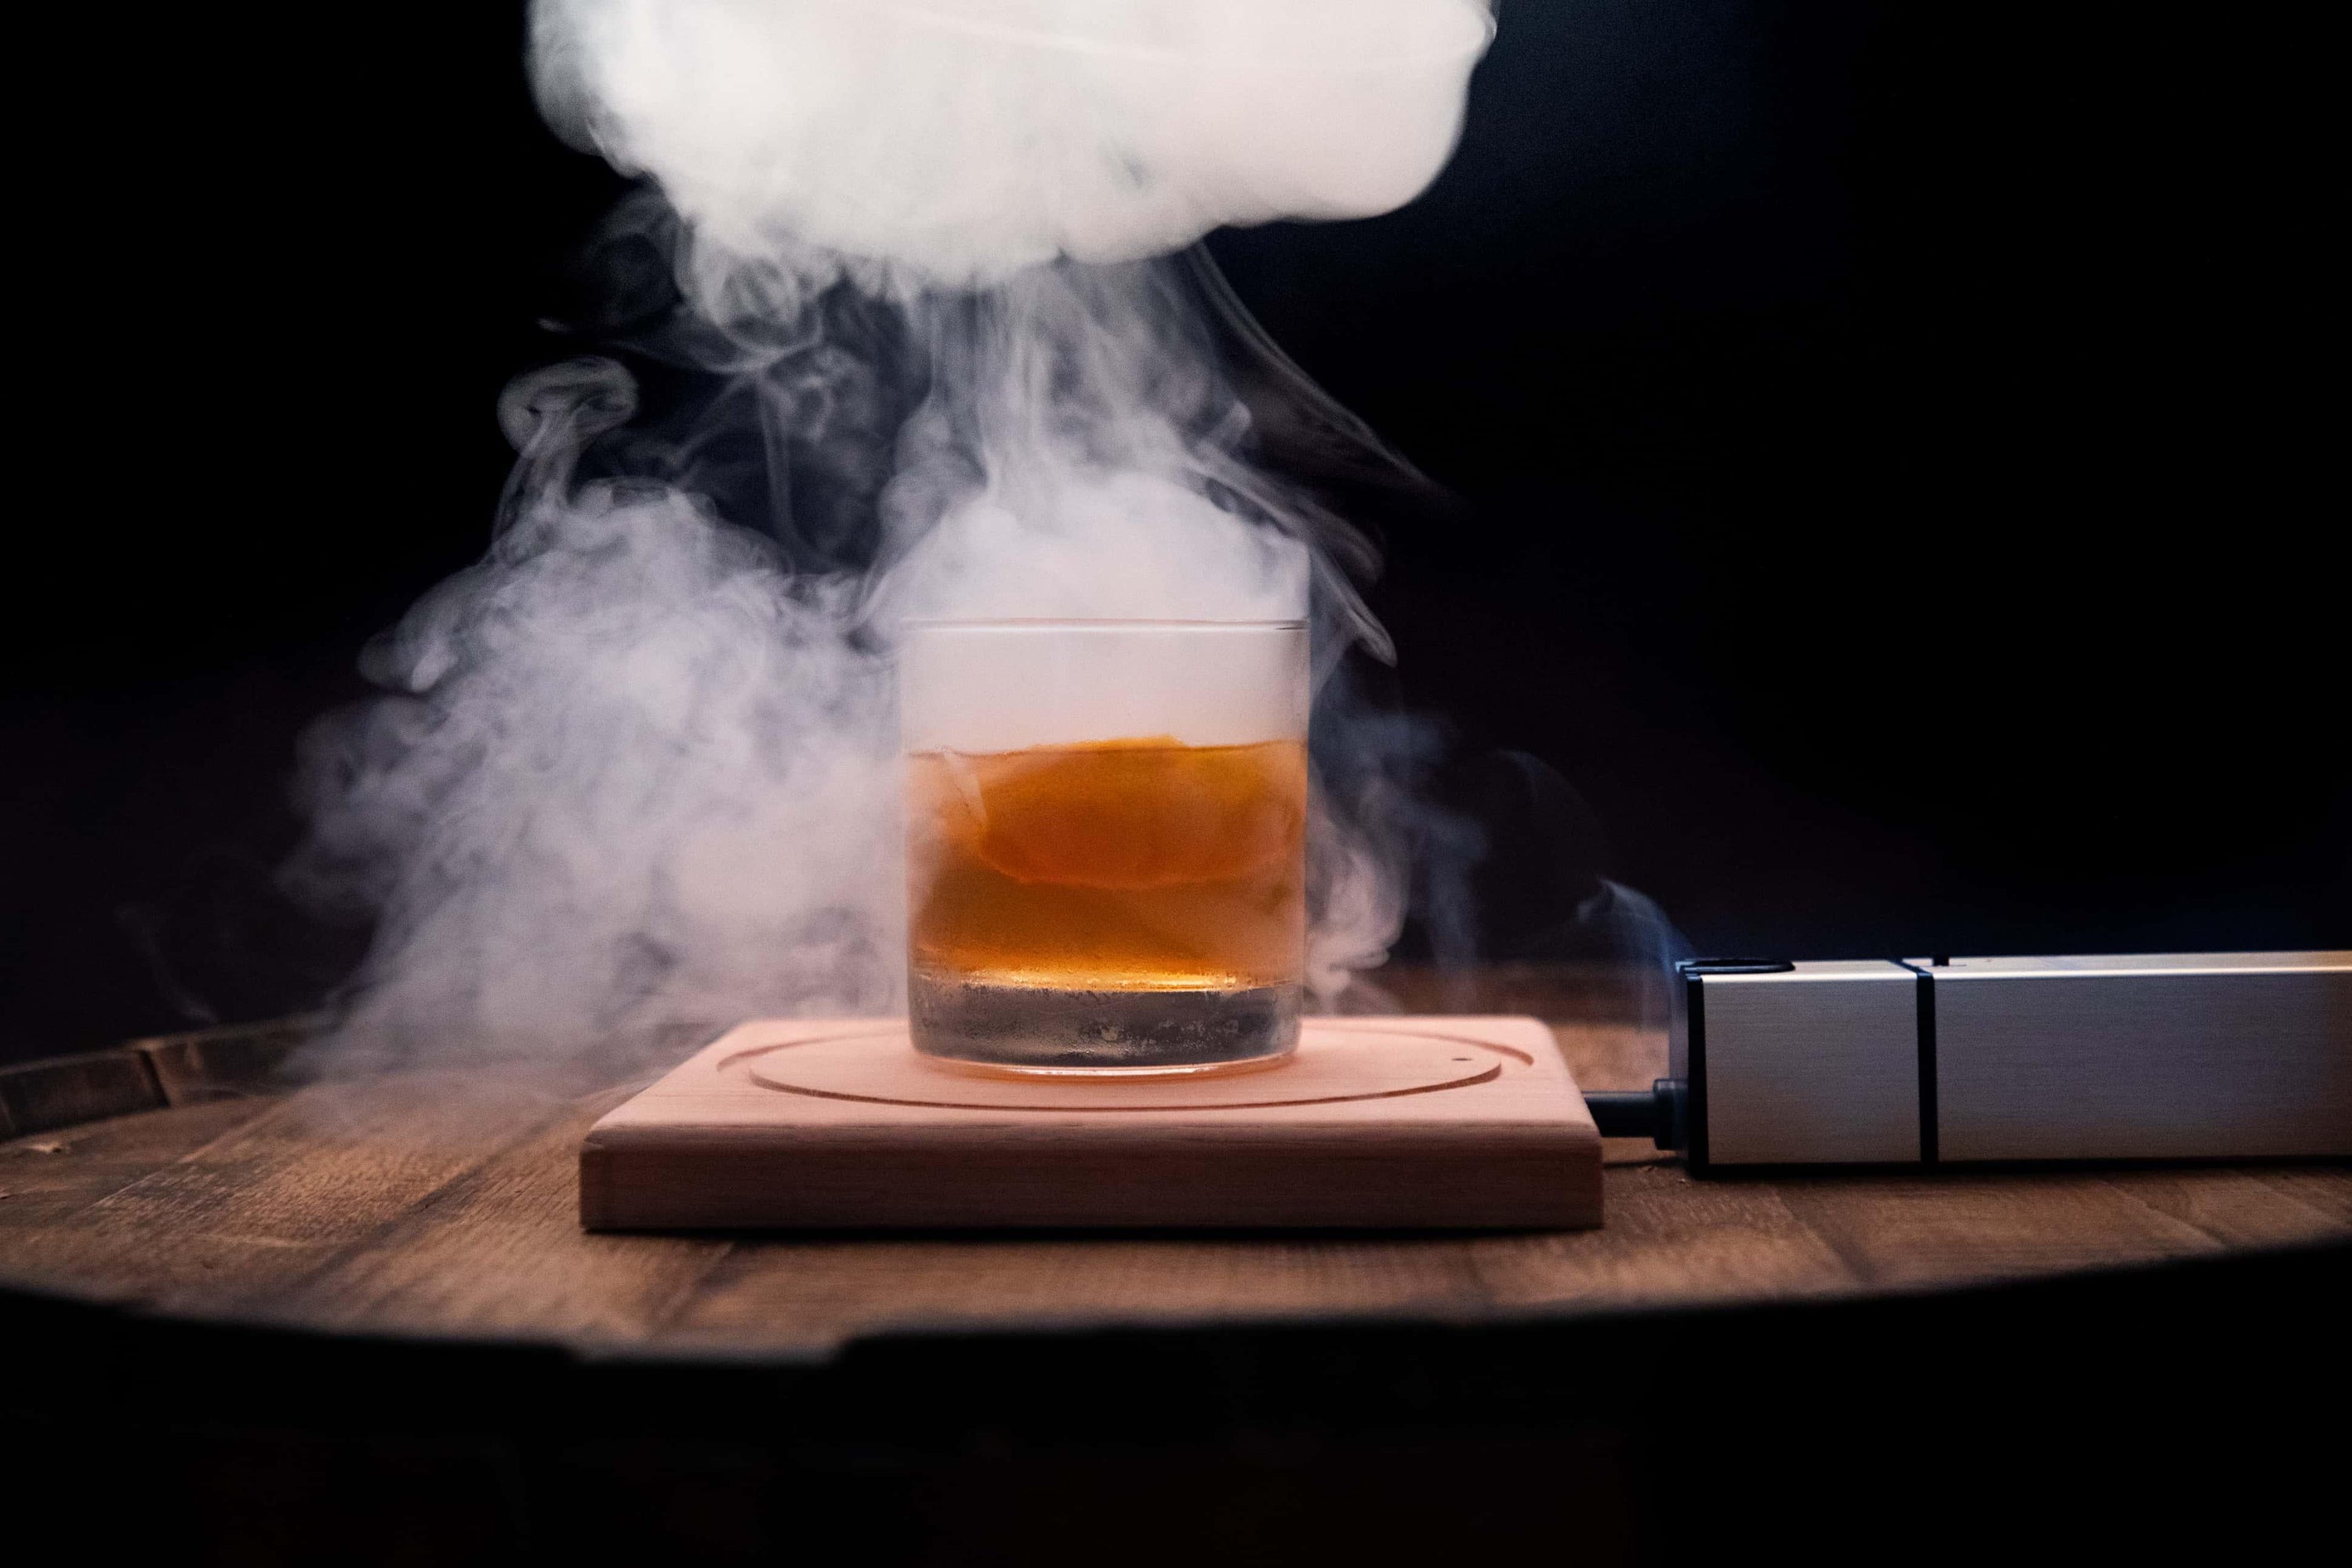 The Cocktail Smoking Dome Kit - The Crafty Cocktail